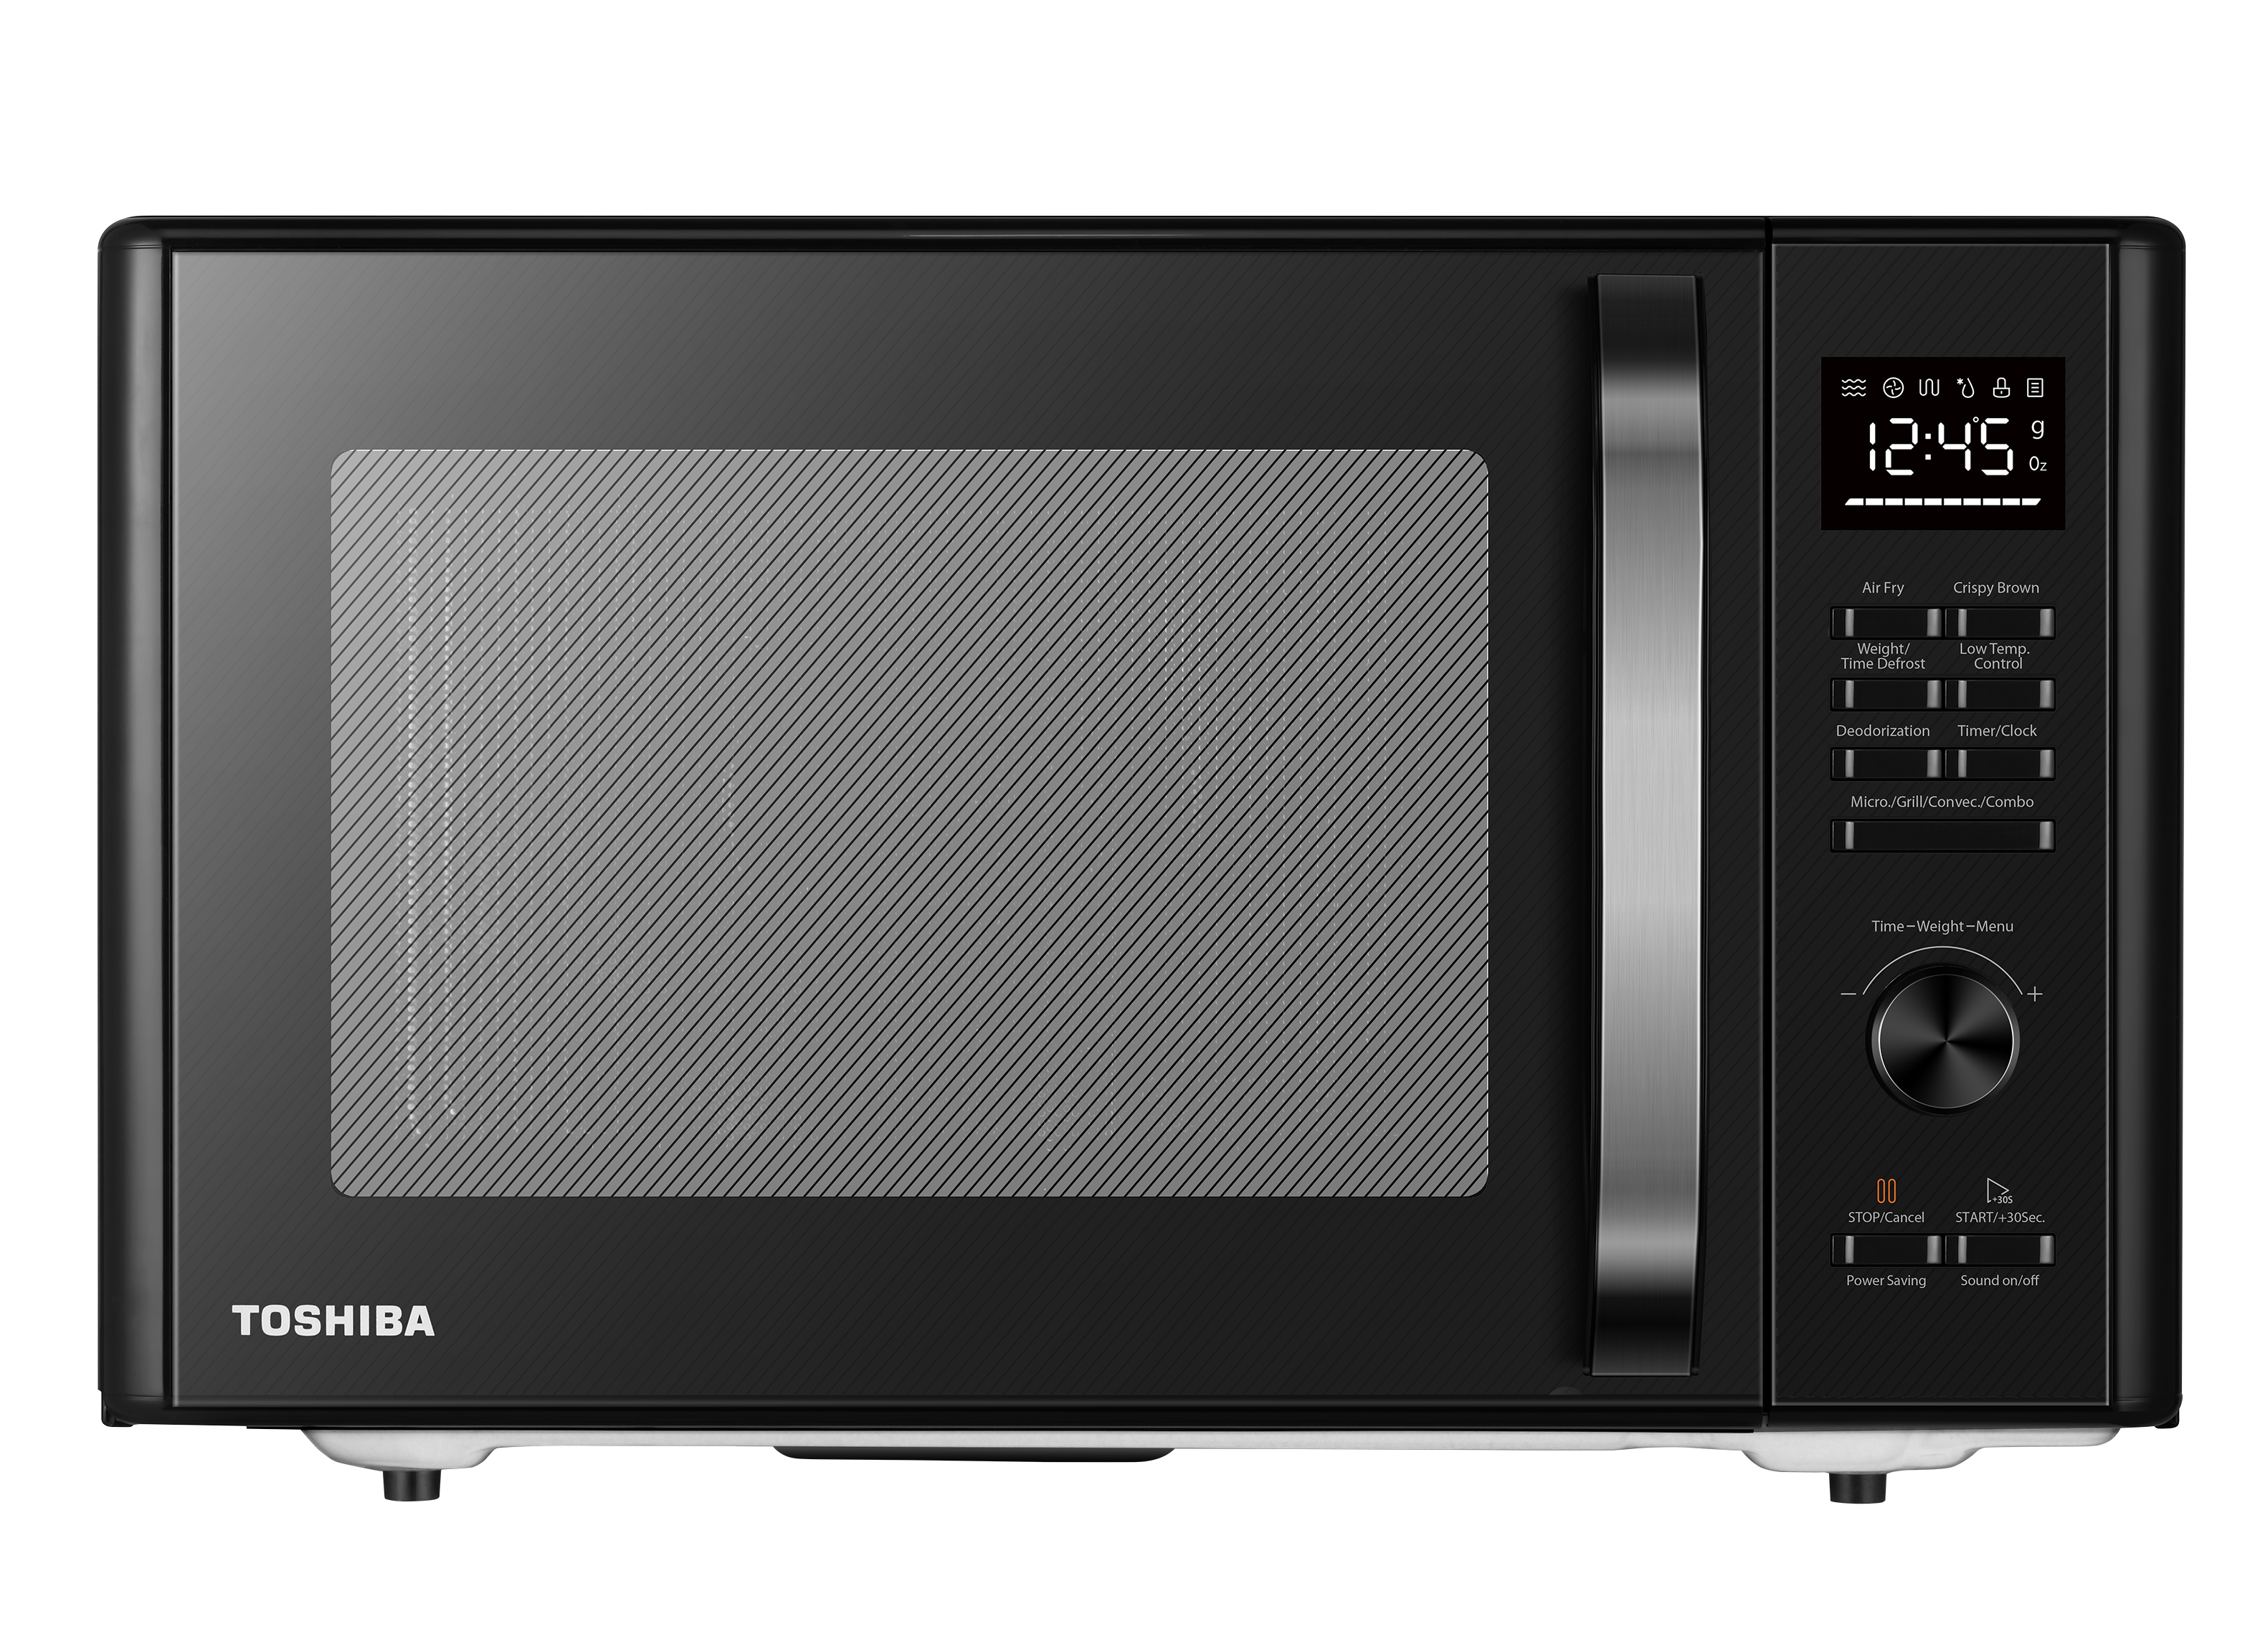 https://crdms.images.consumerreports.org/prod/products/cr/models/406706-midsized-countertop-microwaves-toshiba-ml-ac28s-10030555.png